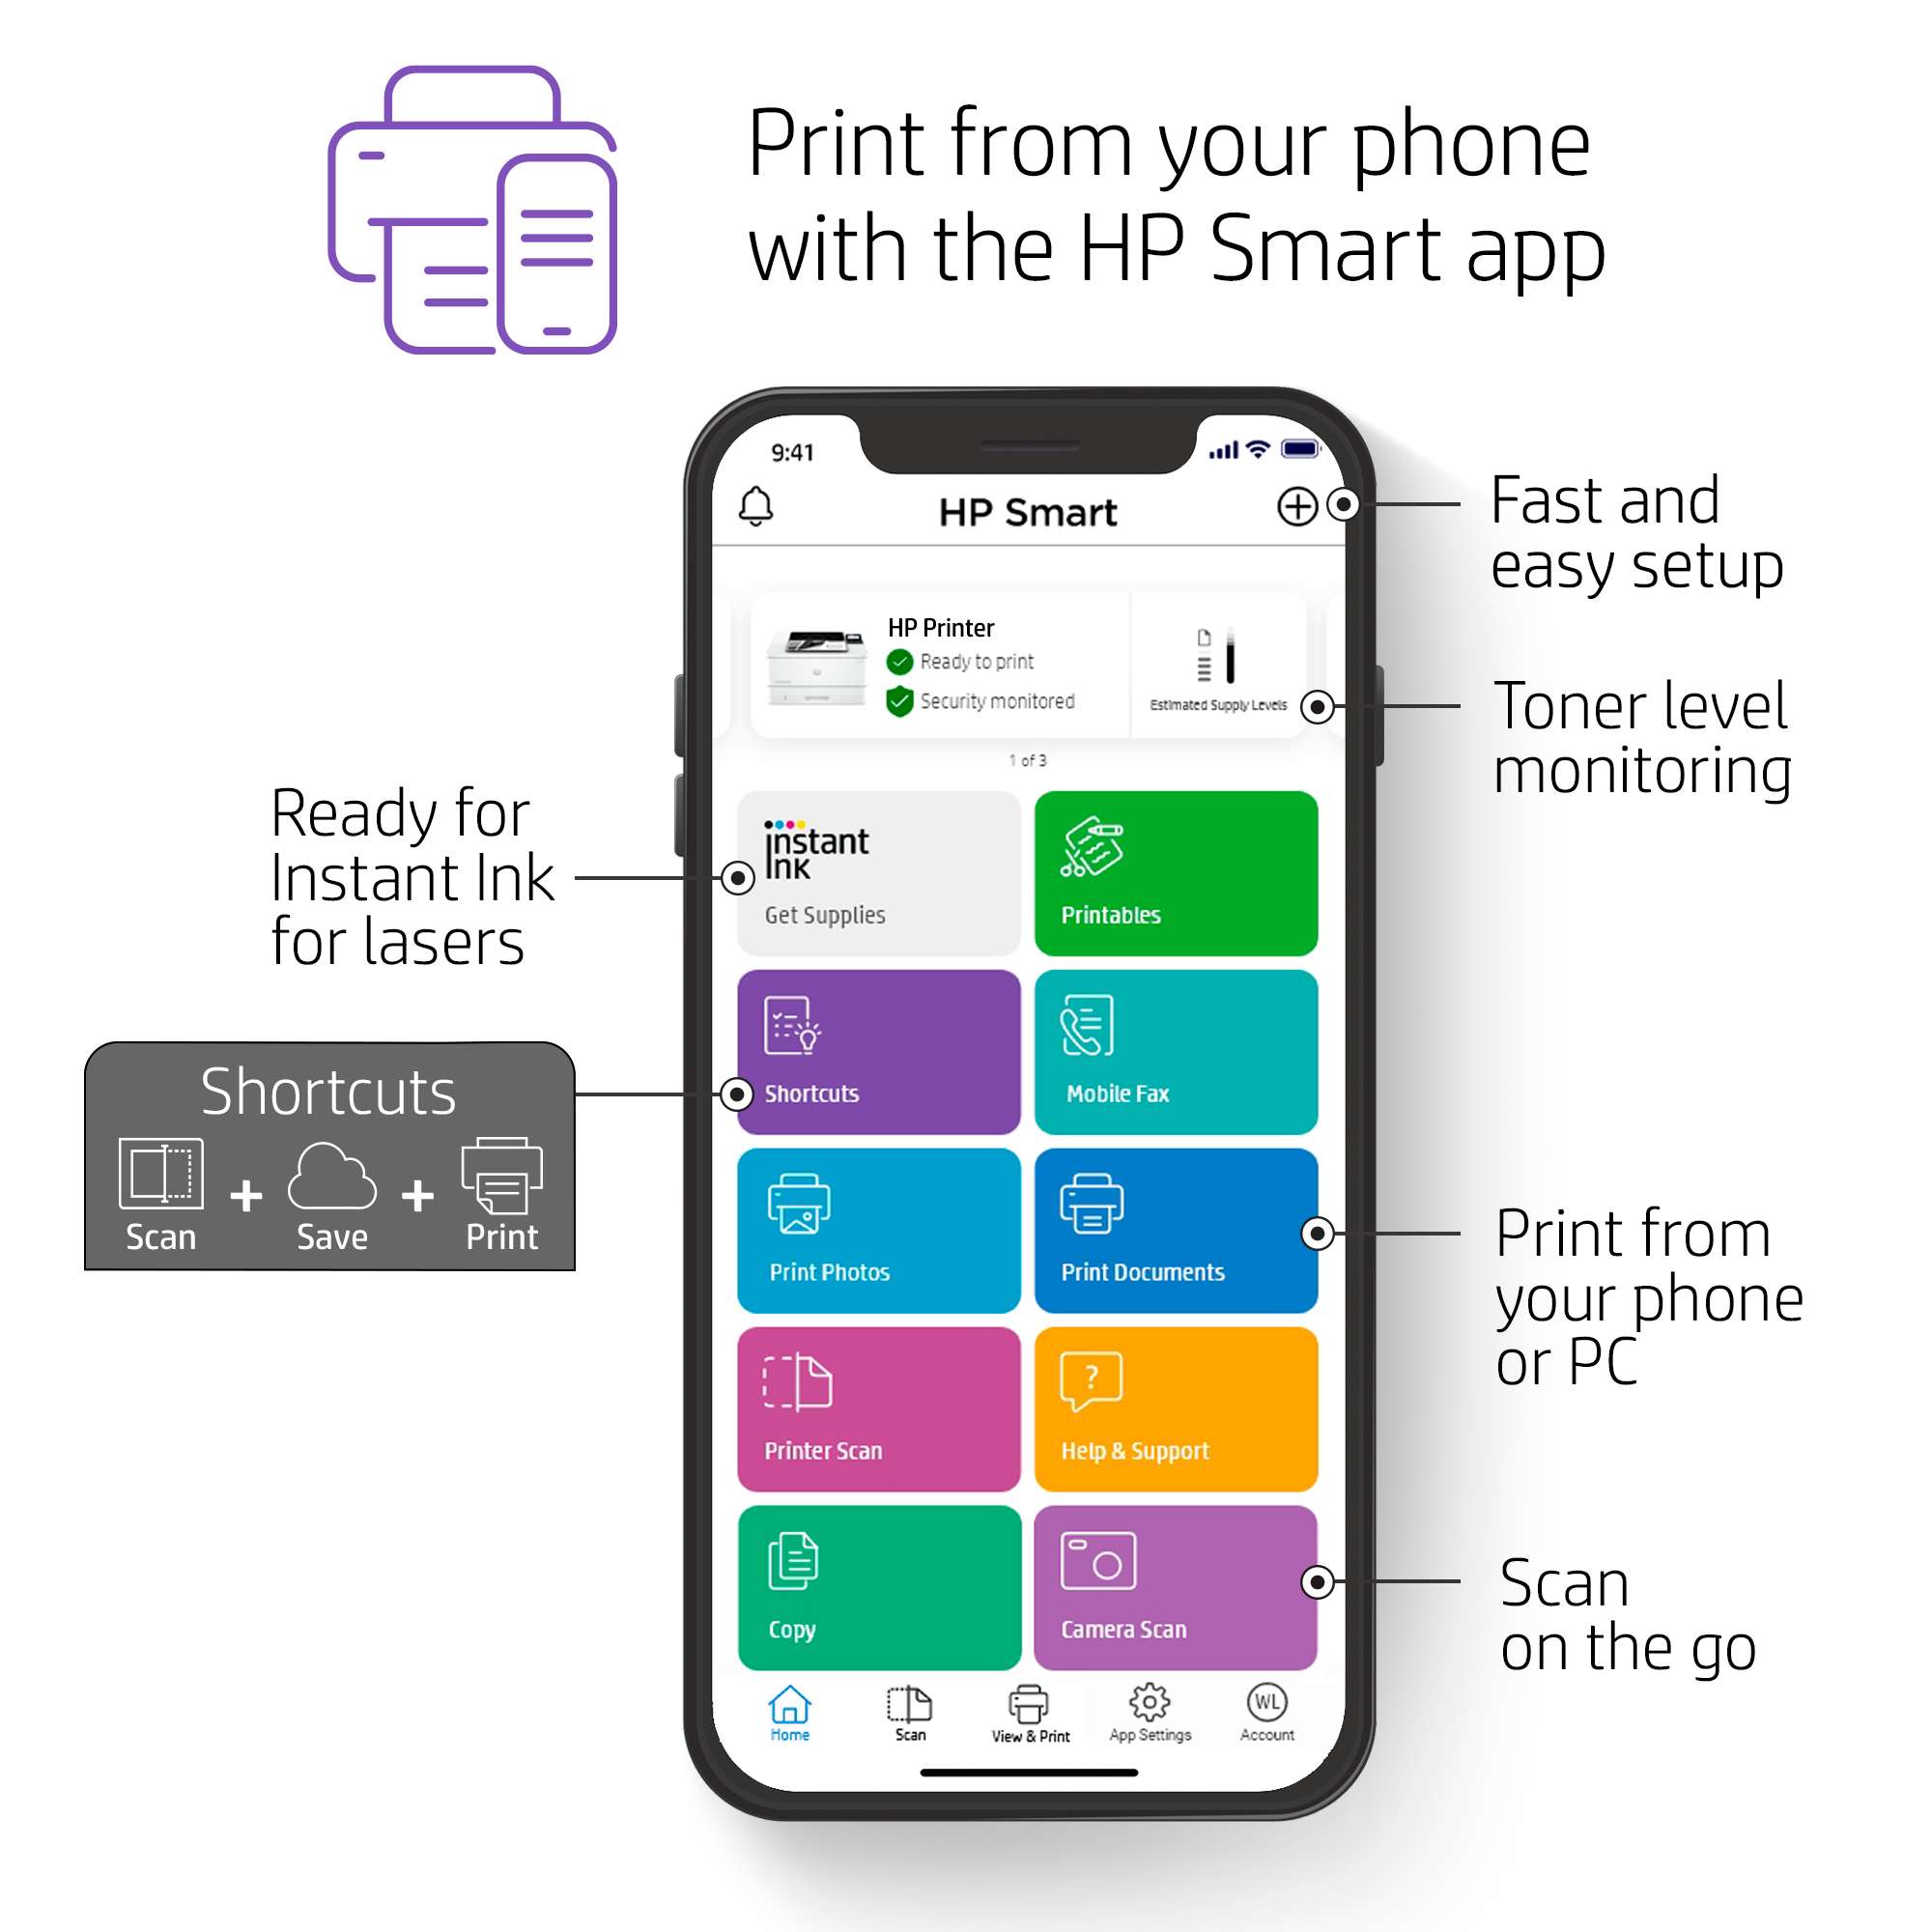 Print and scan from wherever you are! Reply and one of our experts will show you the value of the @HP Smart app. This is the #hybridworkspace solution that lets you manage and monitor your printing and scanning.